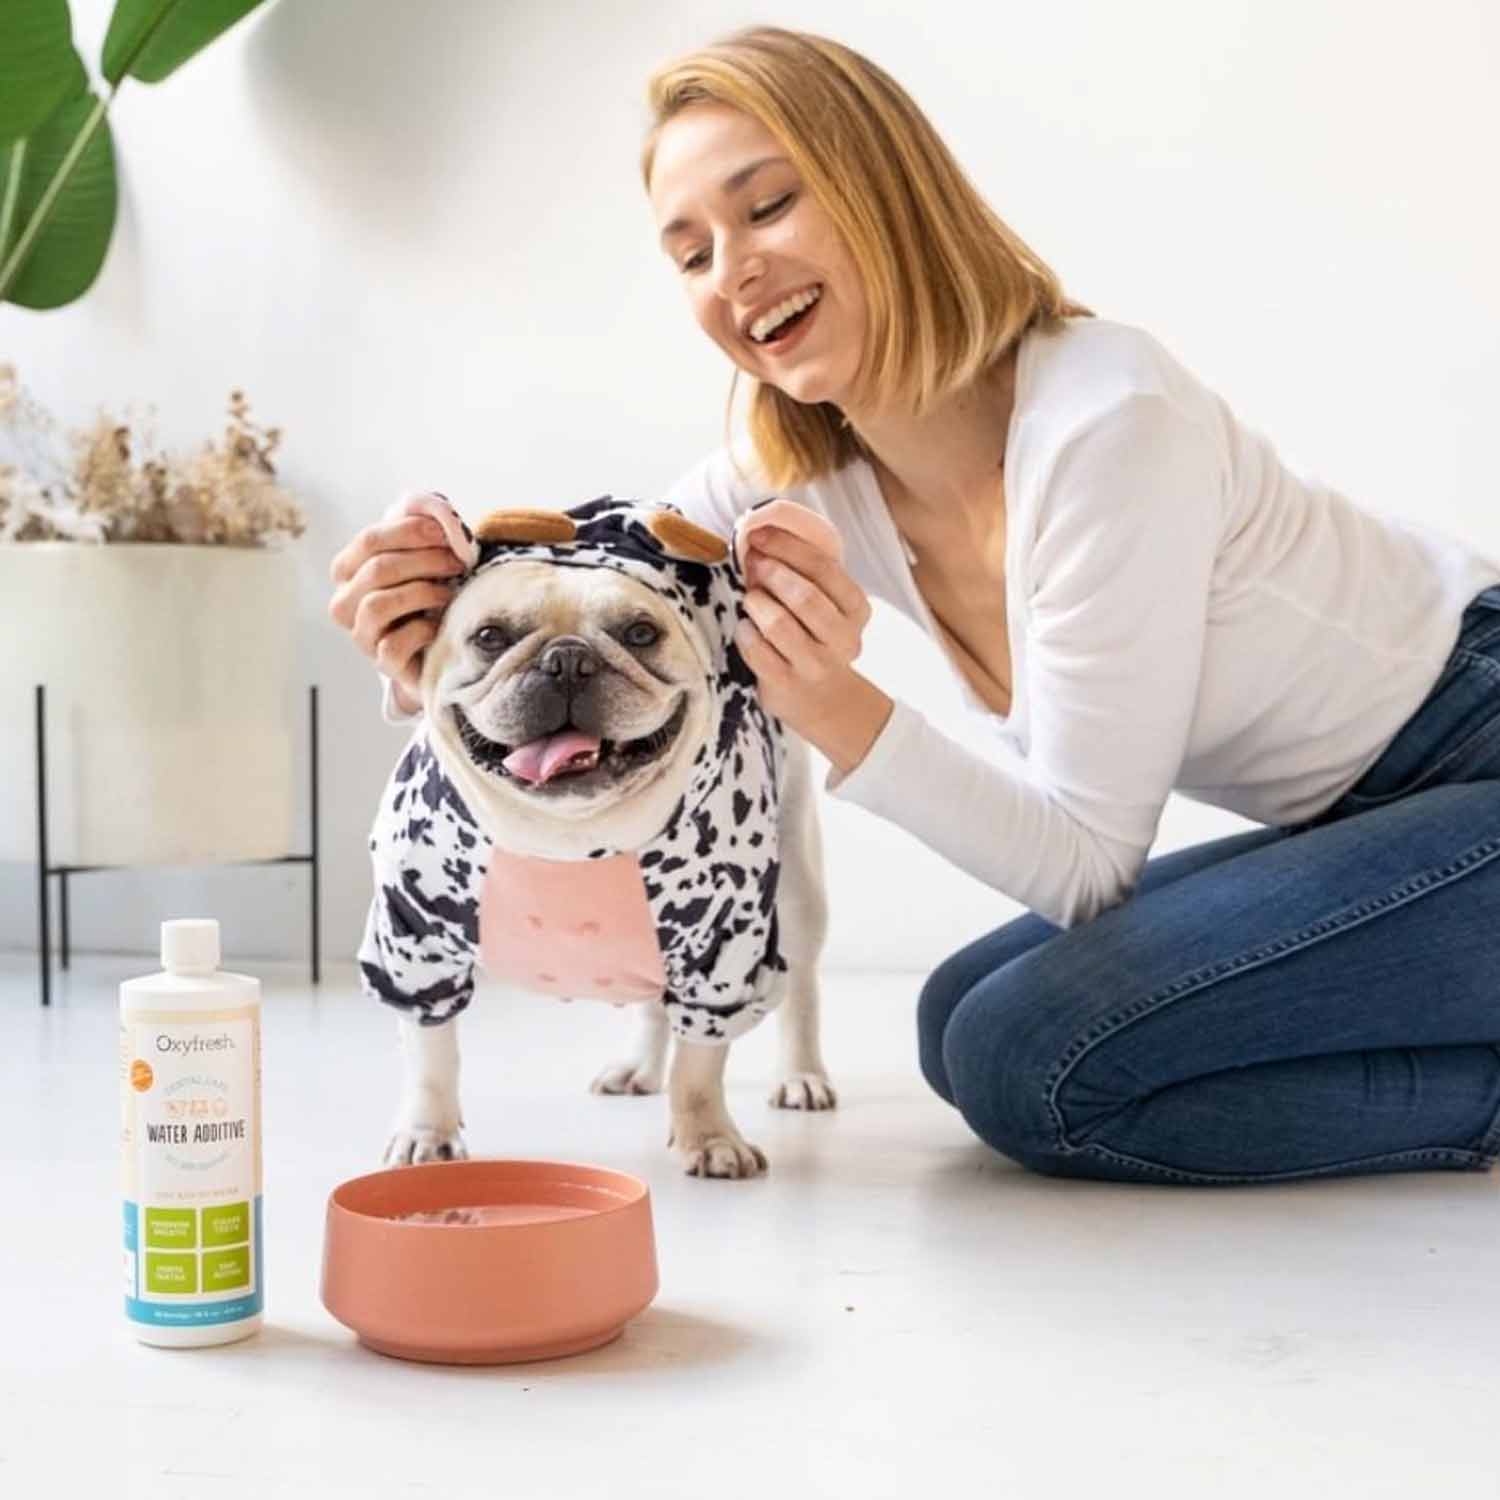 woman-playing-with-the-ears-of-her-dogs-cow-costume-as-the-pup-smiles-at-the-camera-with-a-bowl-of-water-and-oxyfresh-dental-water-additive-for-dogs-teeth-and-breath